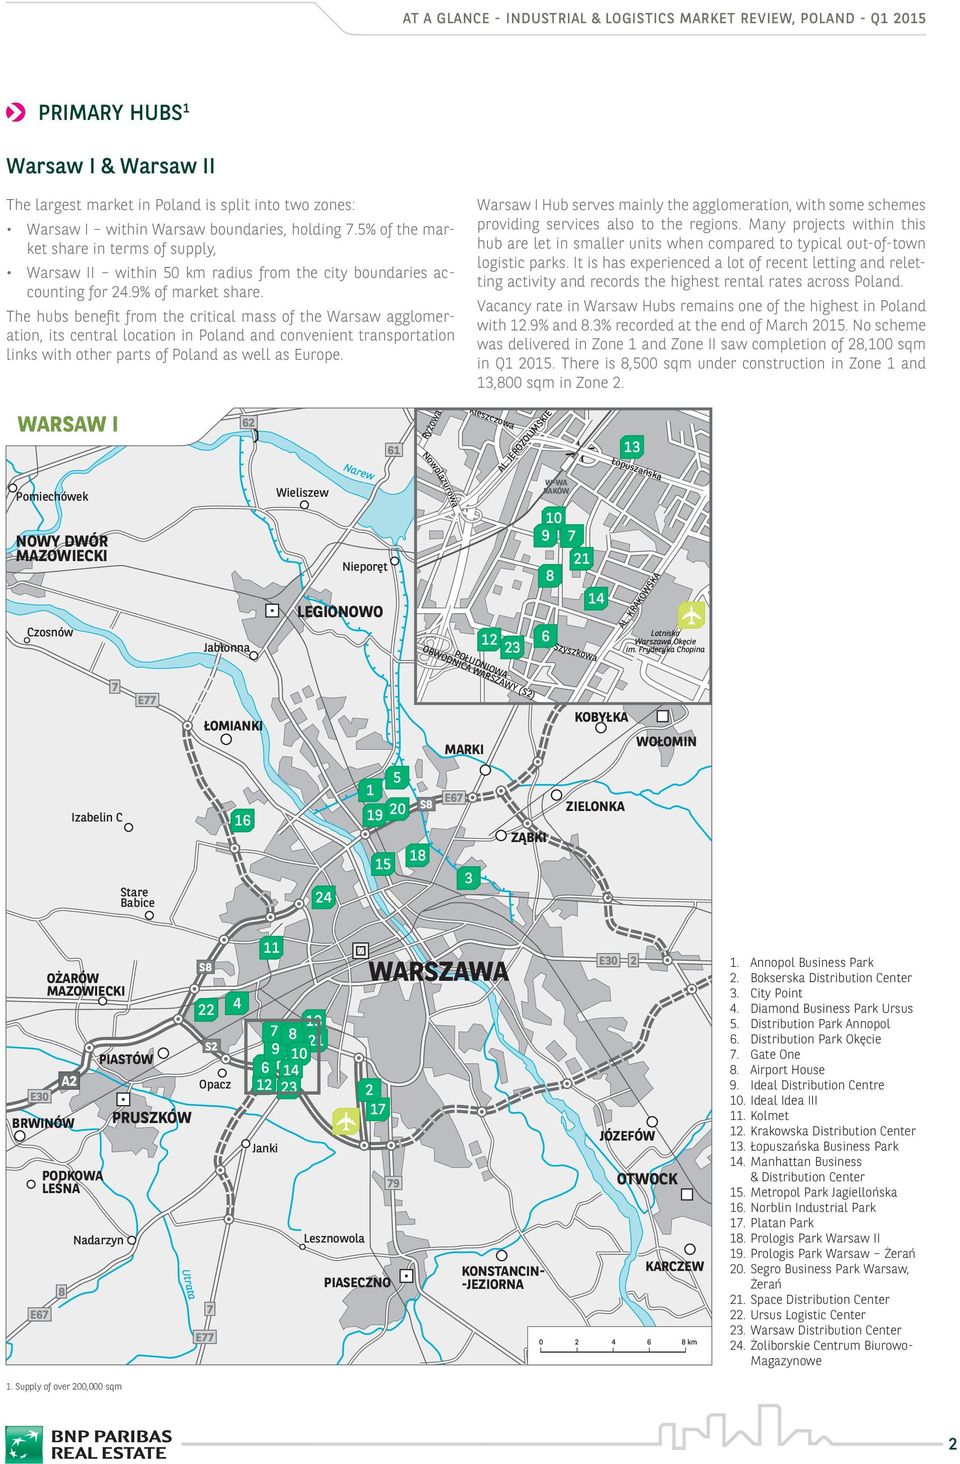 The hubs benefit from the critical mass of the Warsaw agglomeration, its central location in Poland and convenient transportation links with other parts of Poland as well as Europe.